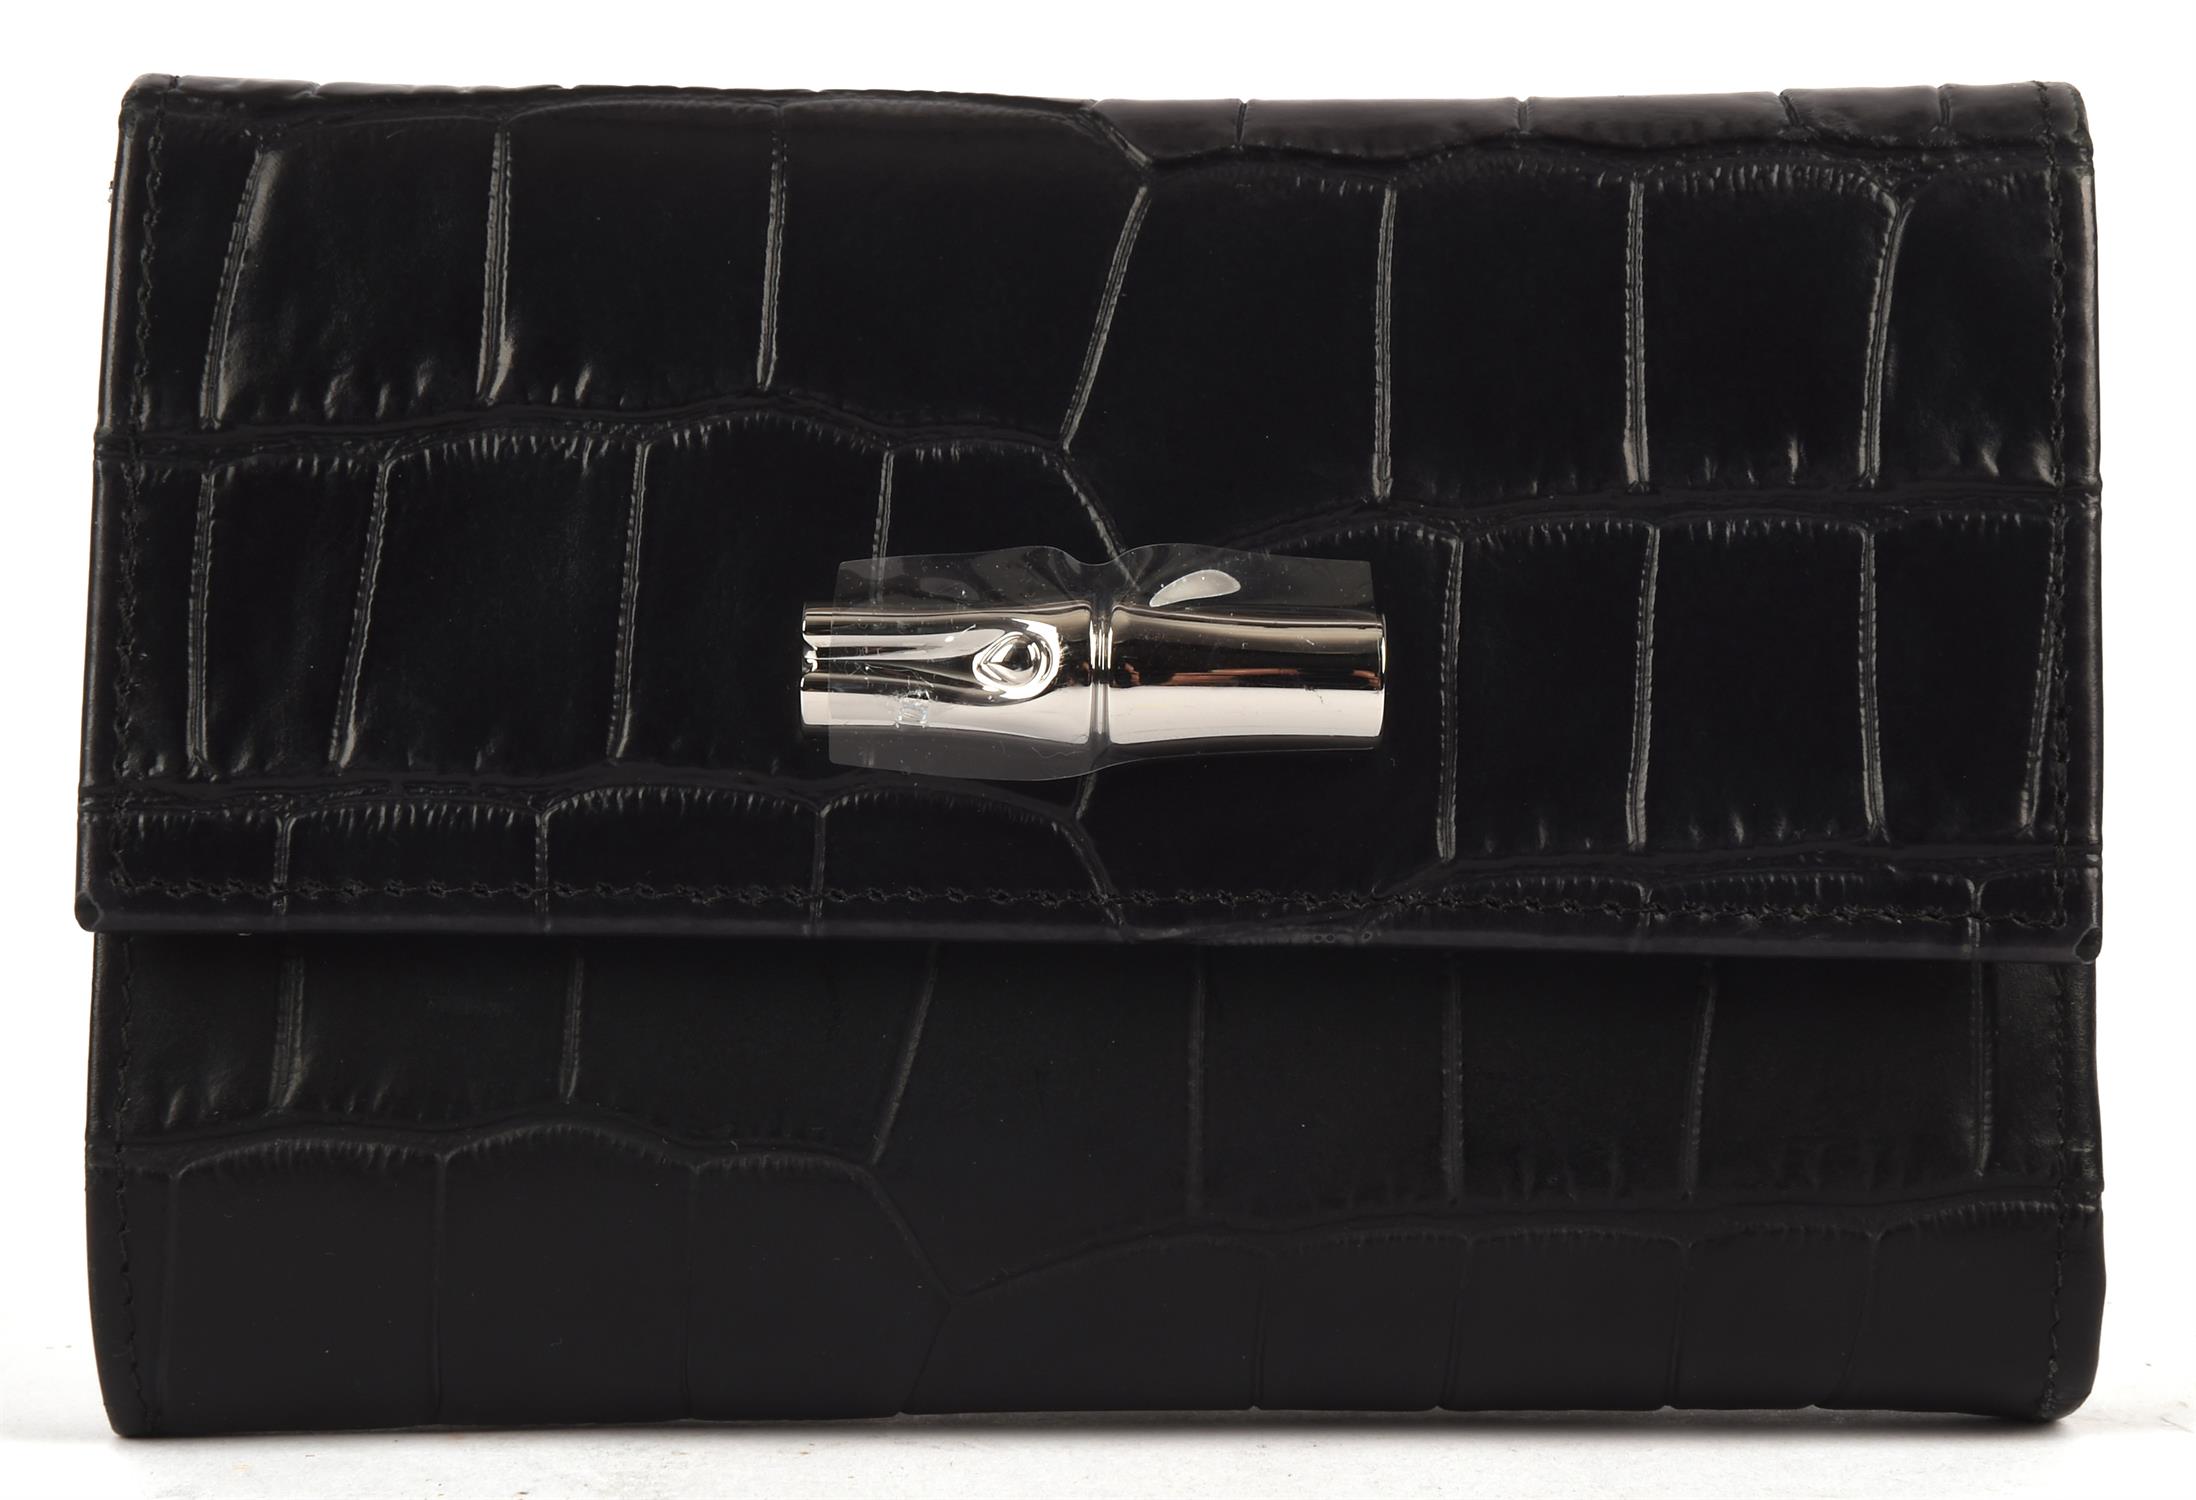 LANGCHAMP unused black croc embossed leather ladies tri-fold purse with silver hardware and - Image 2 of 4